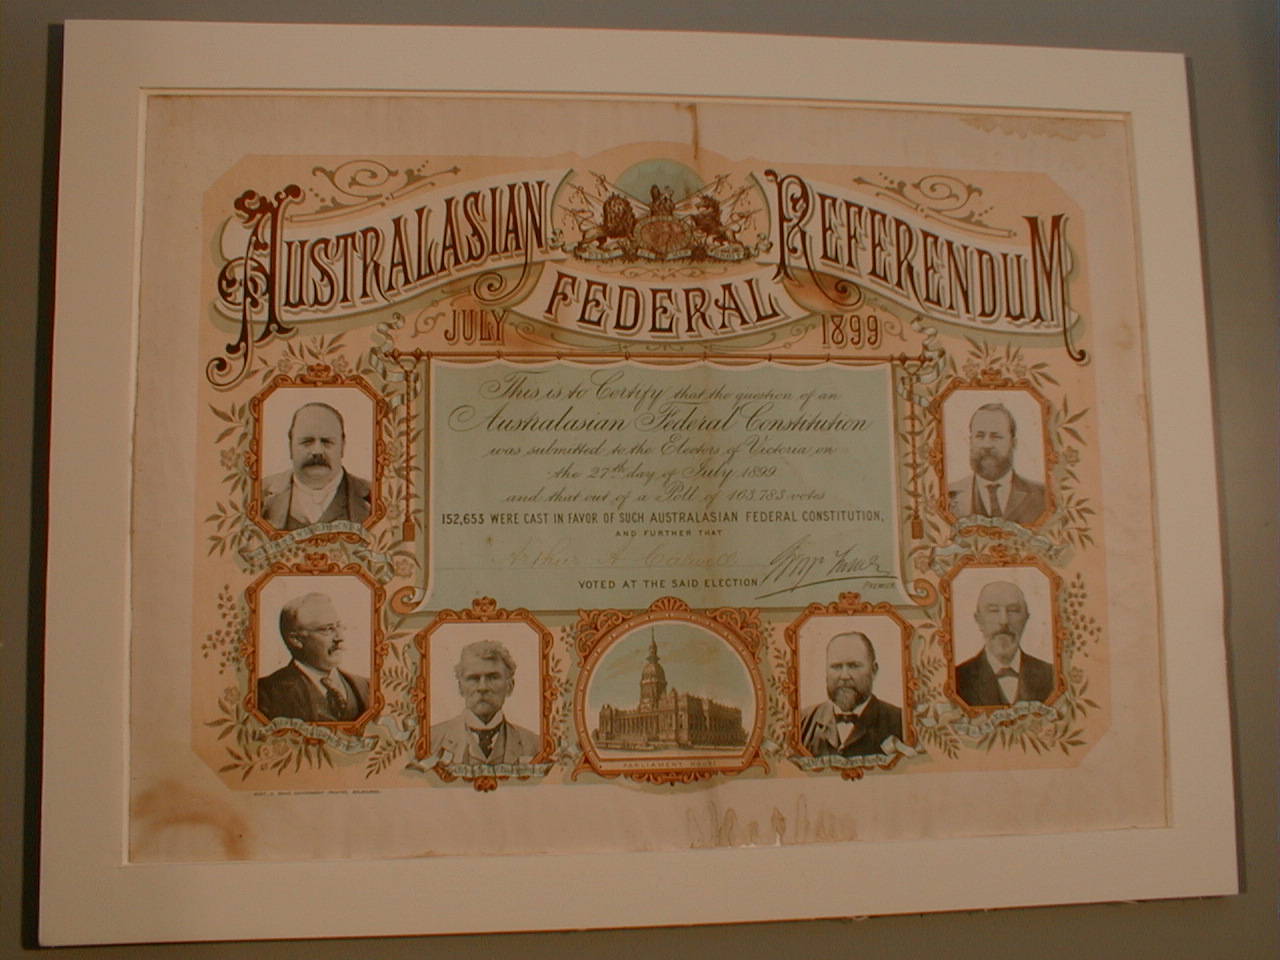 This poster, featuring the six Colonial Premiers